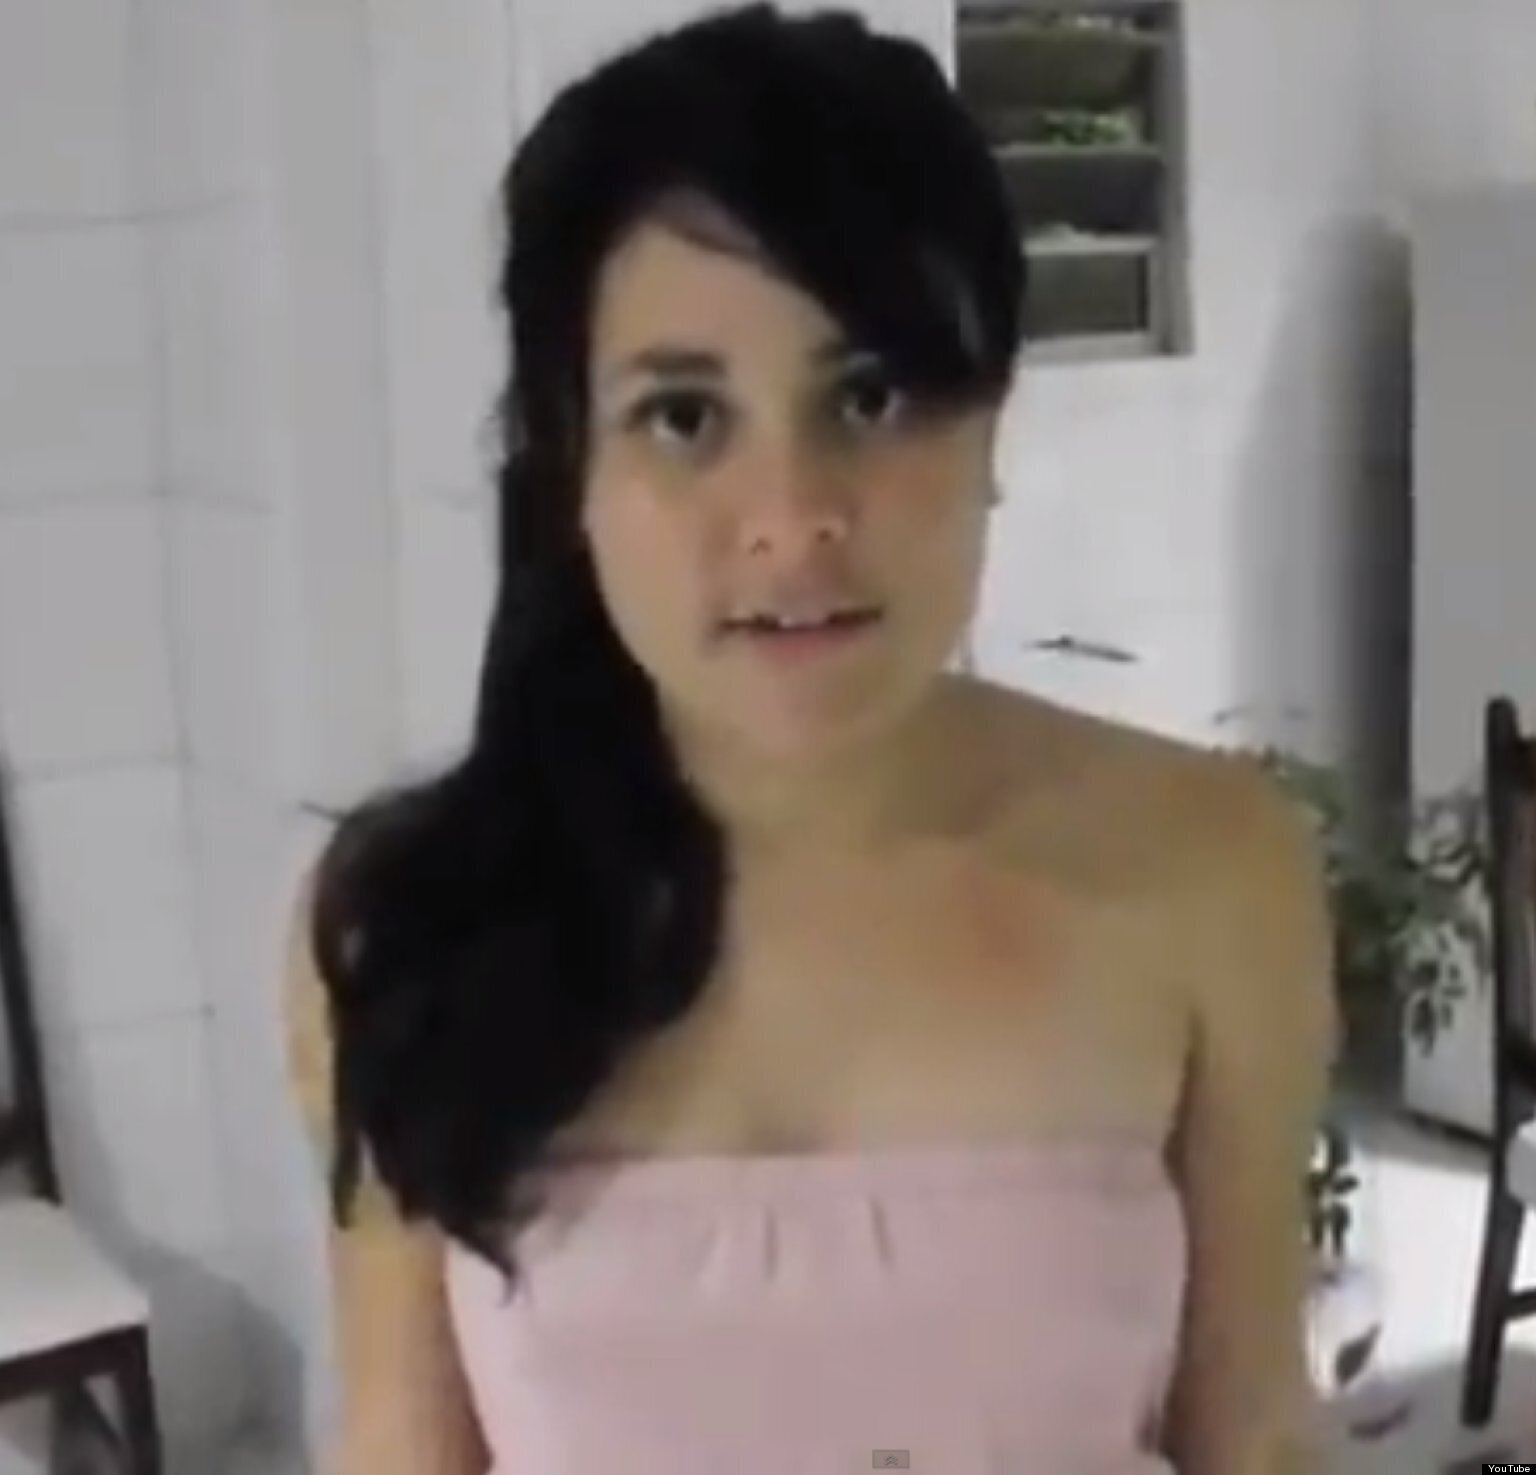 Brazilian Rebecca Bernardo, 18, To Auction Virginity Online To Pay For Ailing Mothers Medical Bills HuffPost UK News